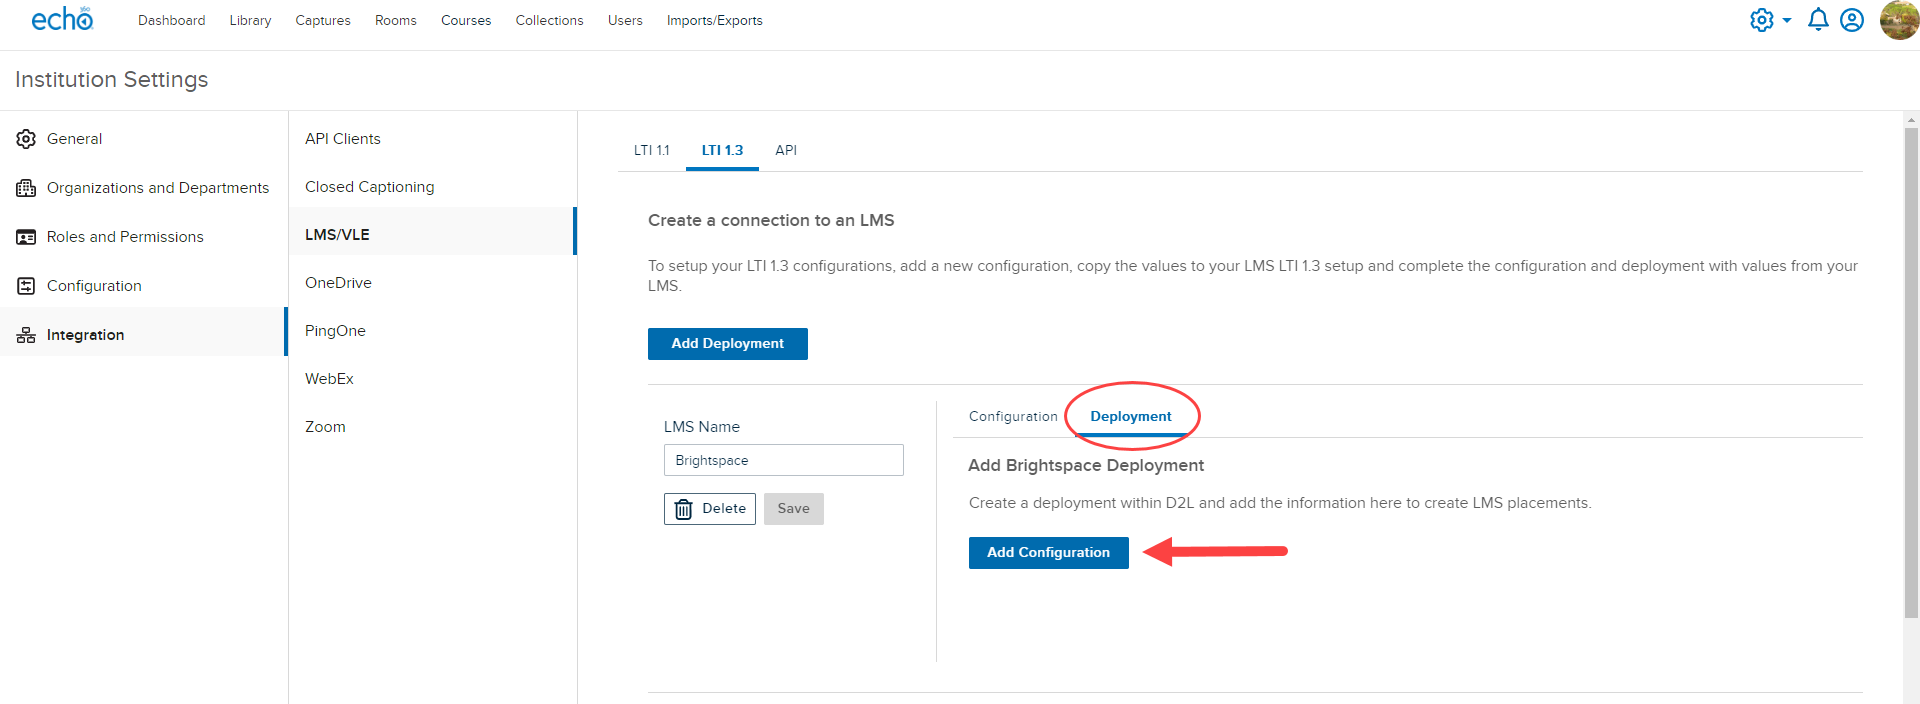 Echo360 LMS Deployment with Add Configuration button as described